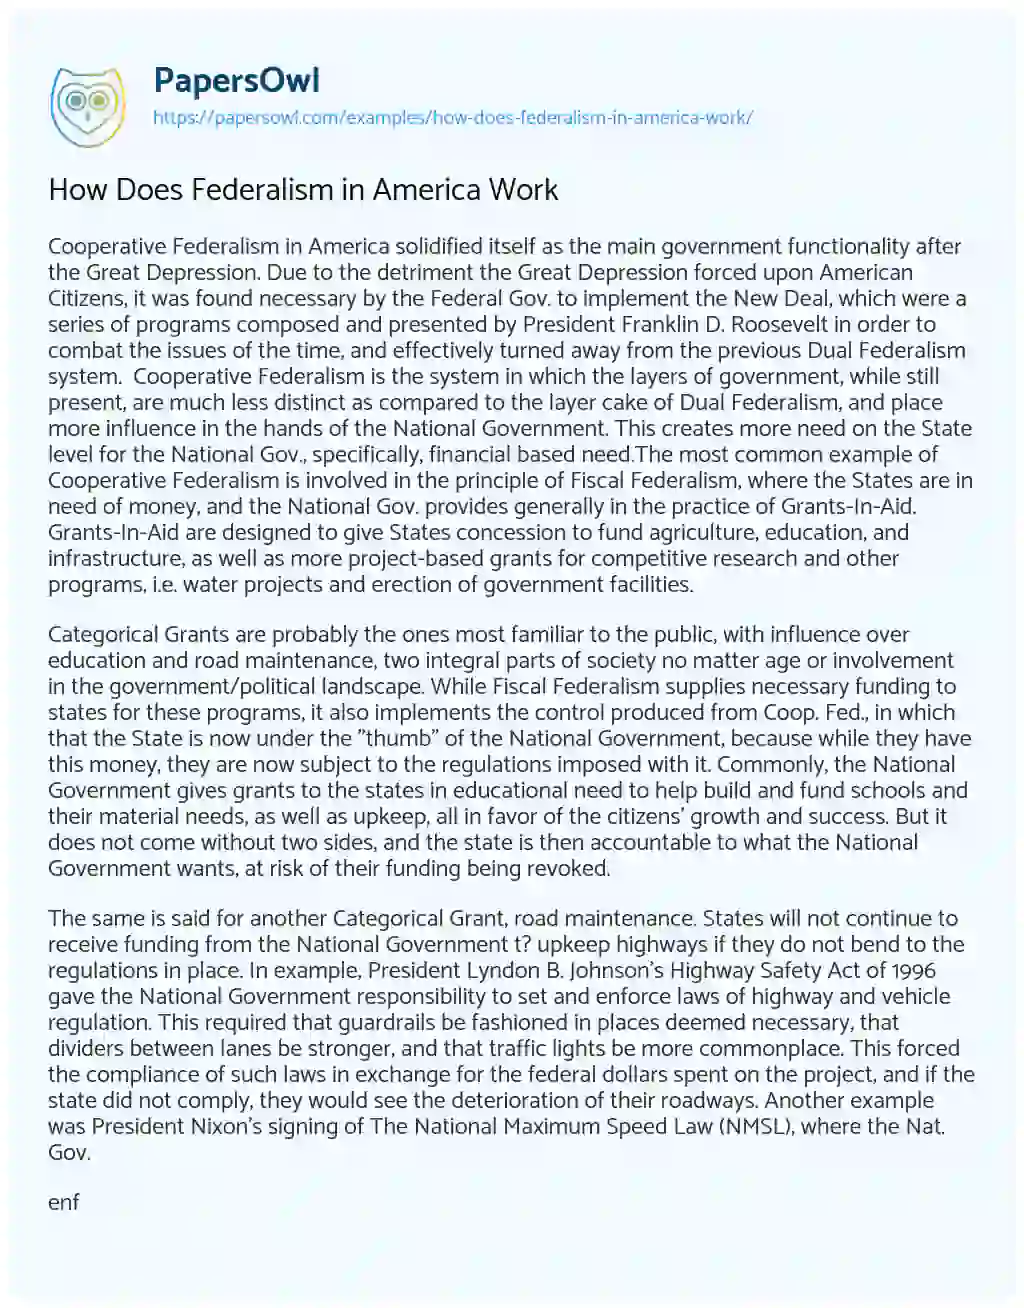 Essay on How does Federalism in America Work